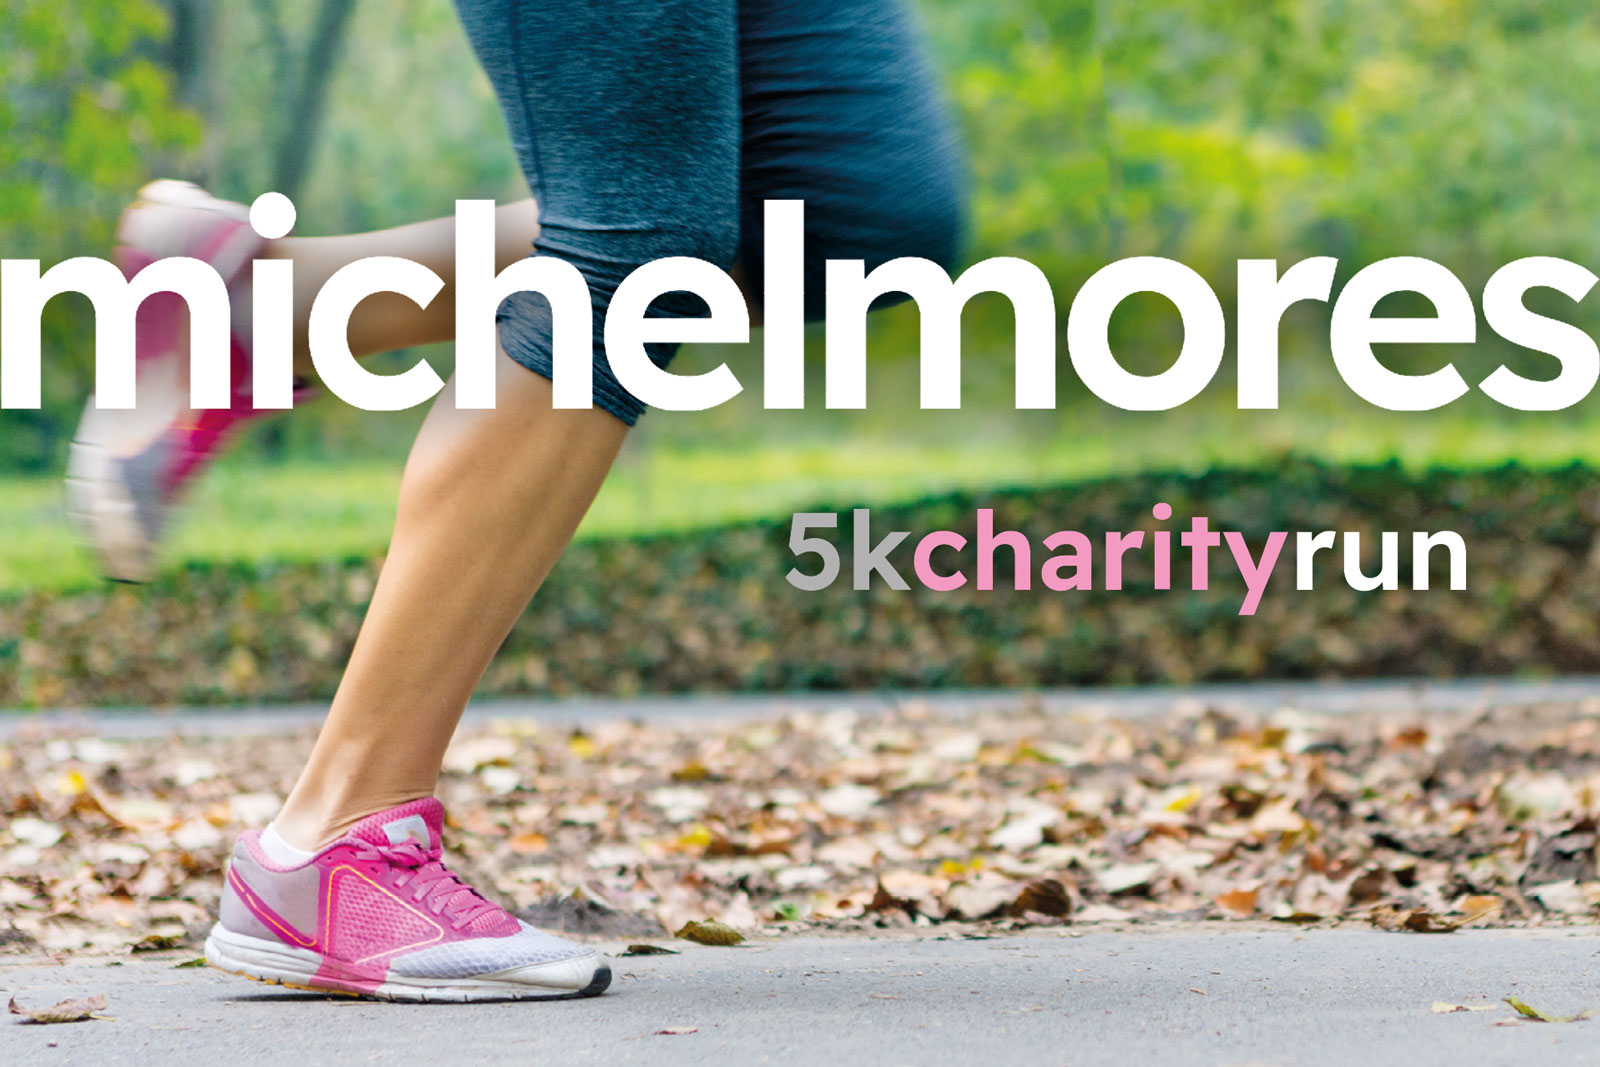 The 22nd Michelmores 5K Charity Run